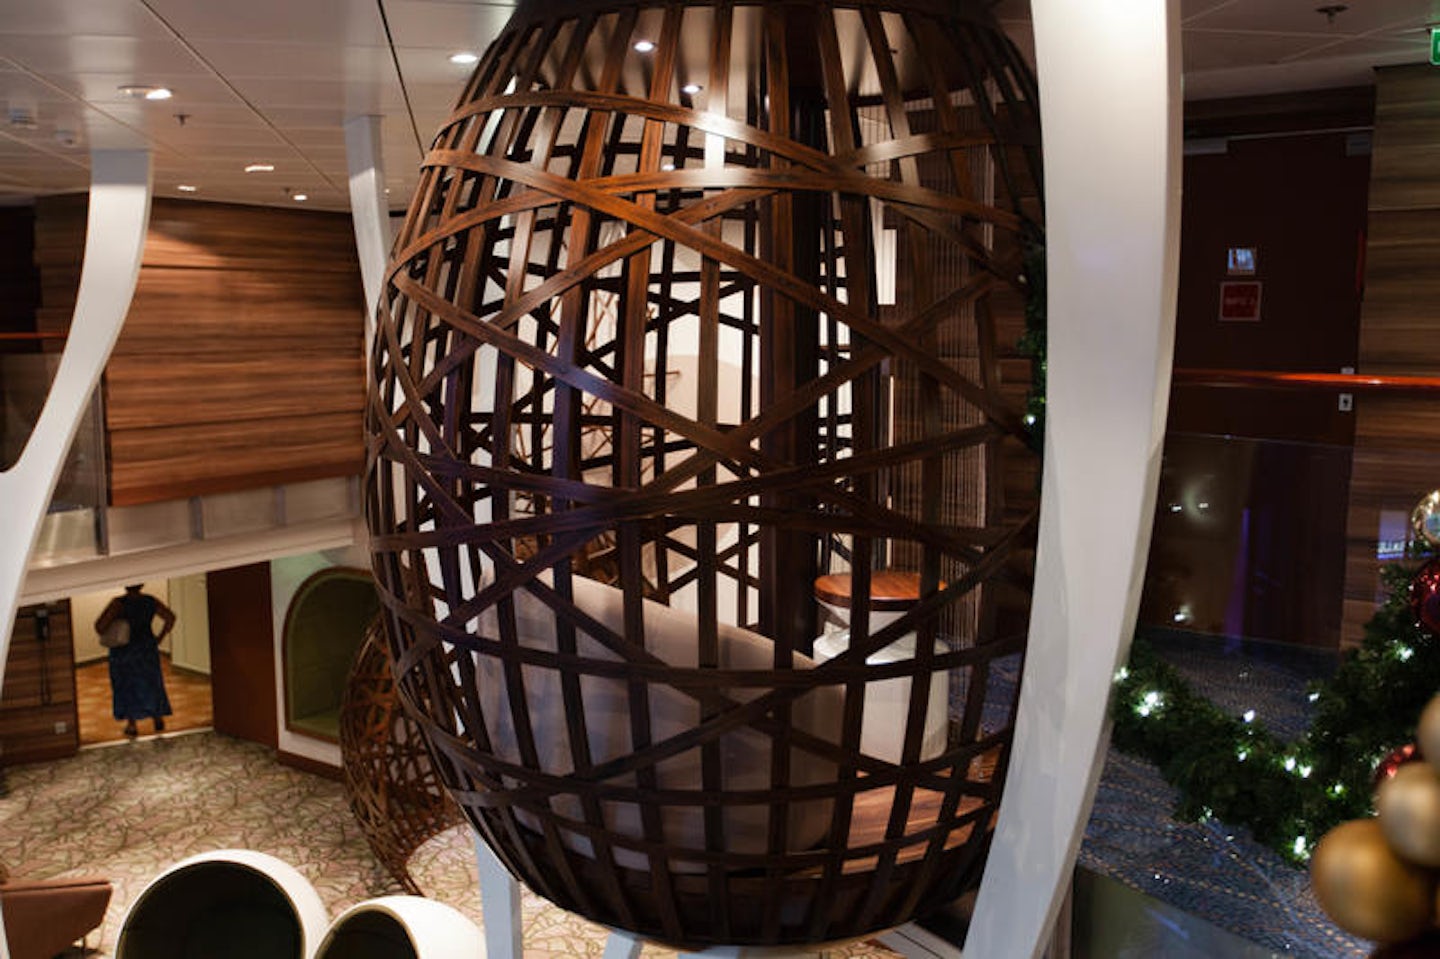 The Hideaway on Celebrity Silhouette